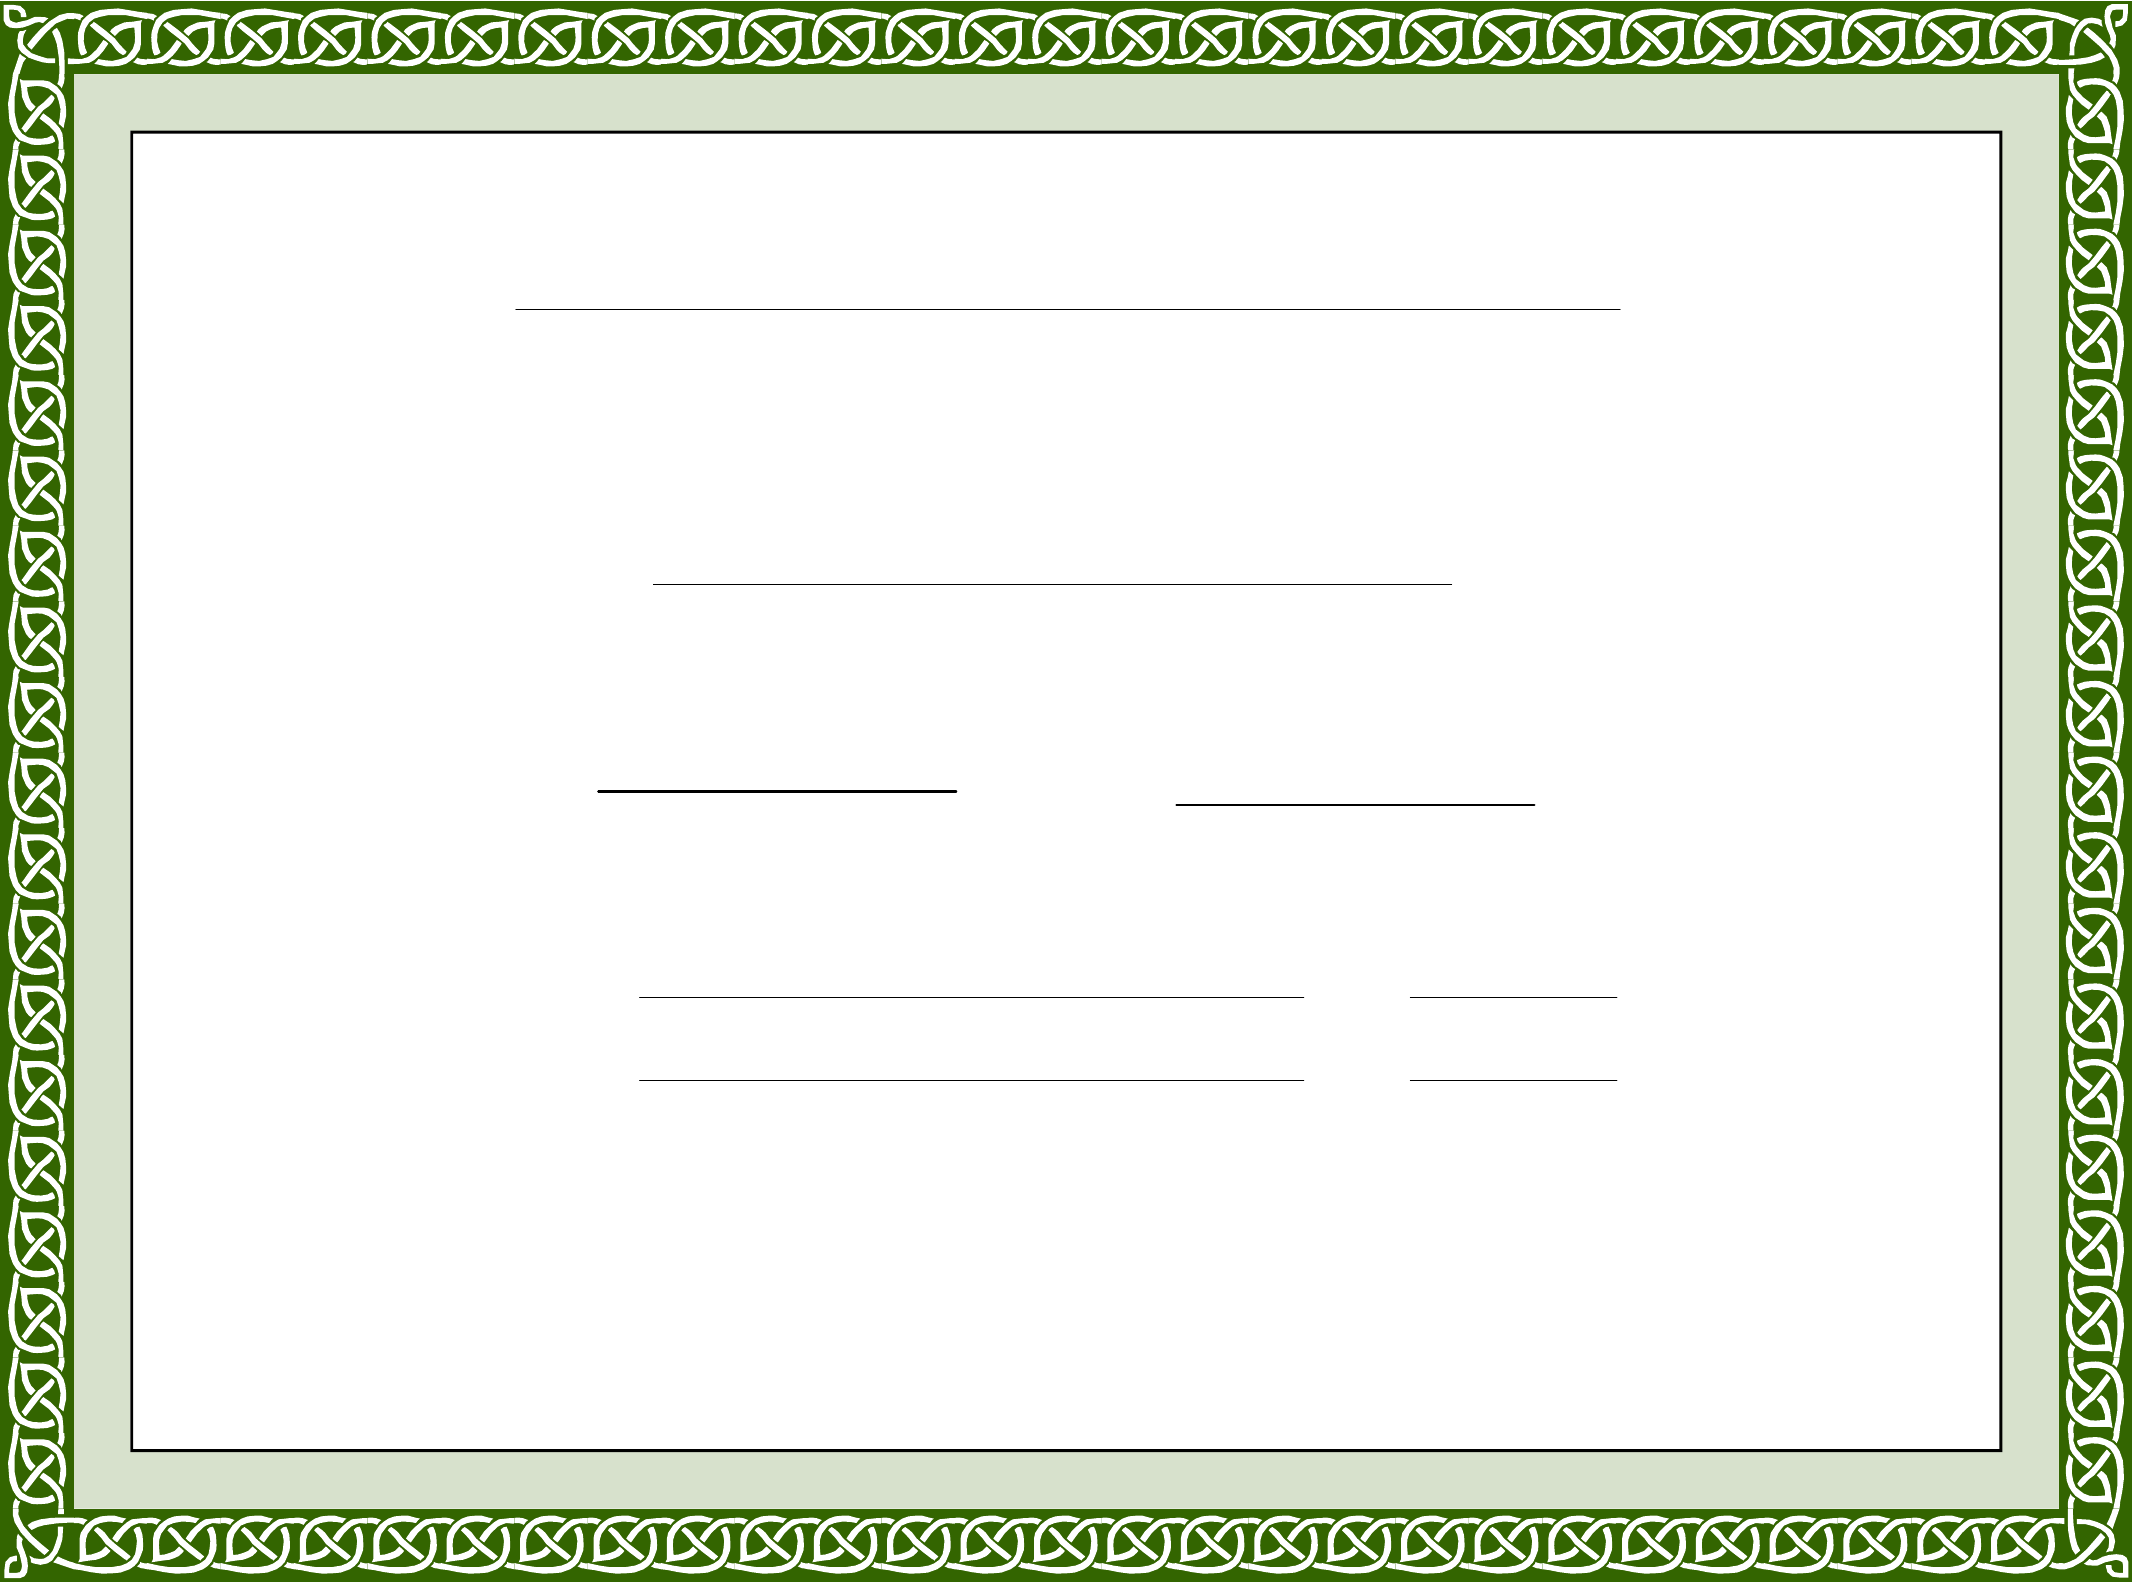 Sample Training Completion Certificate Template - Edit ...